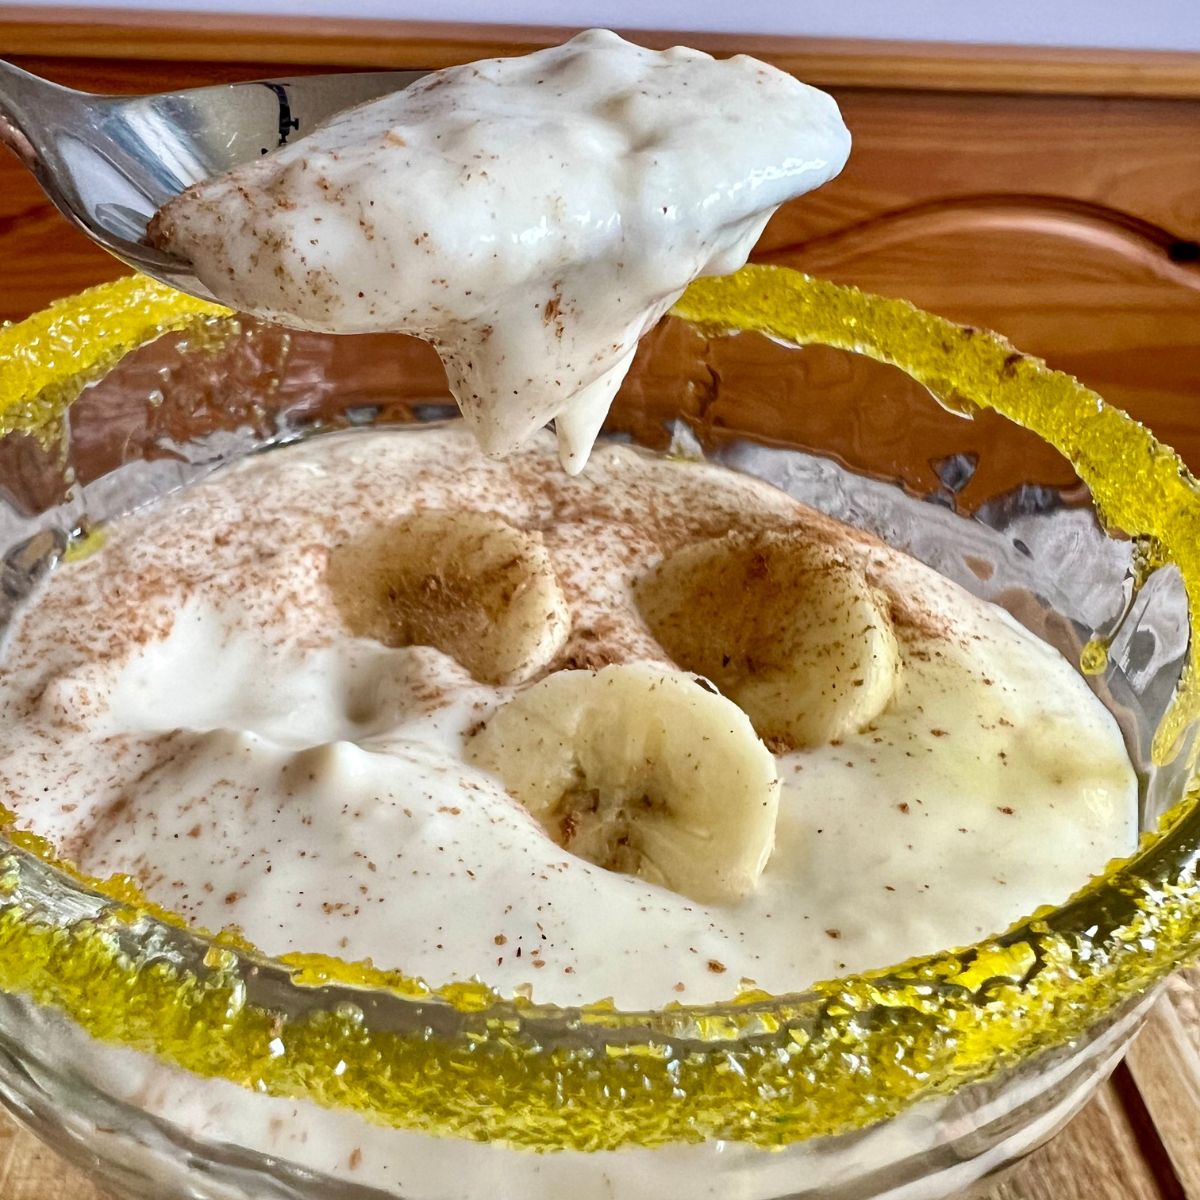 A spoonful of Weight Watcher's Banana Protein Pudding